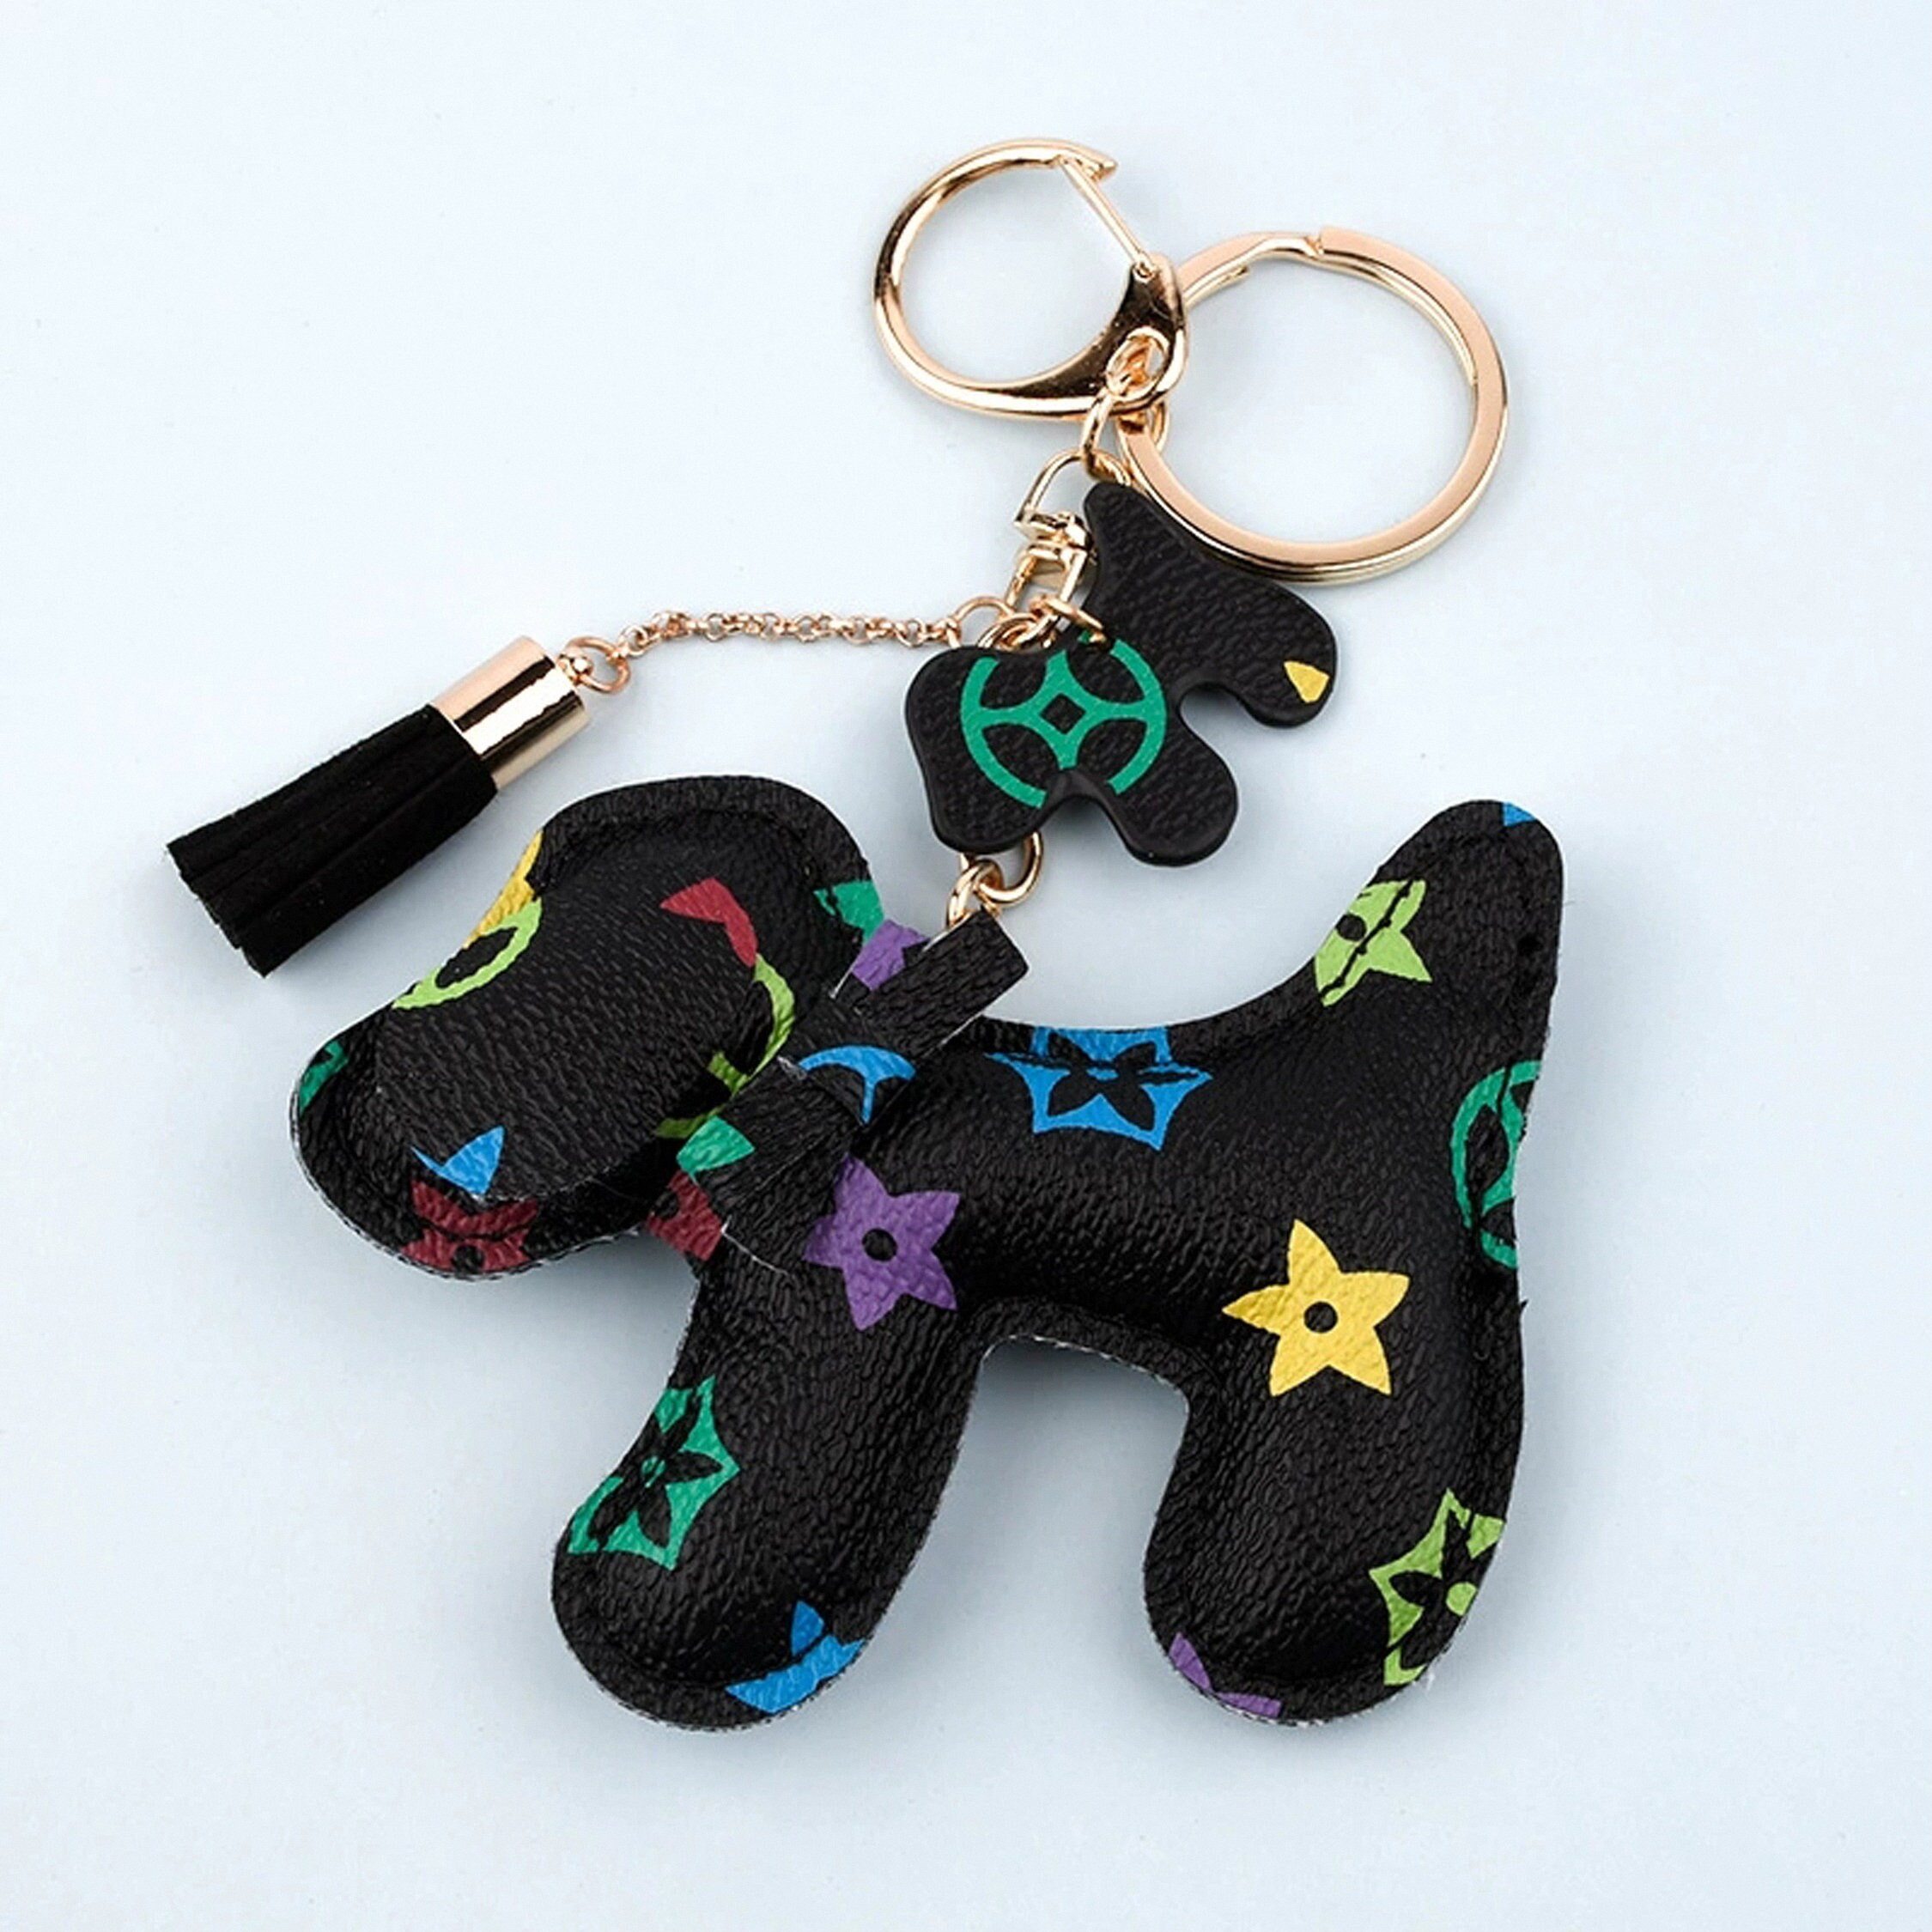 Leather Dog Bag Charm Leather Cute Papillon Dog Keychains With 